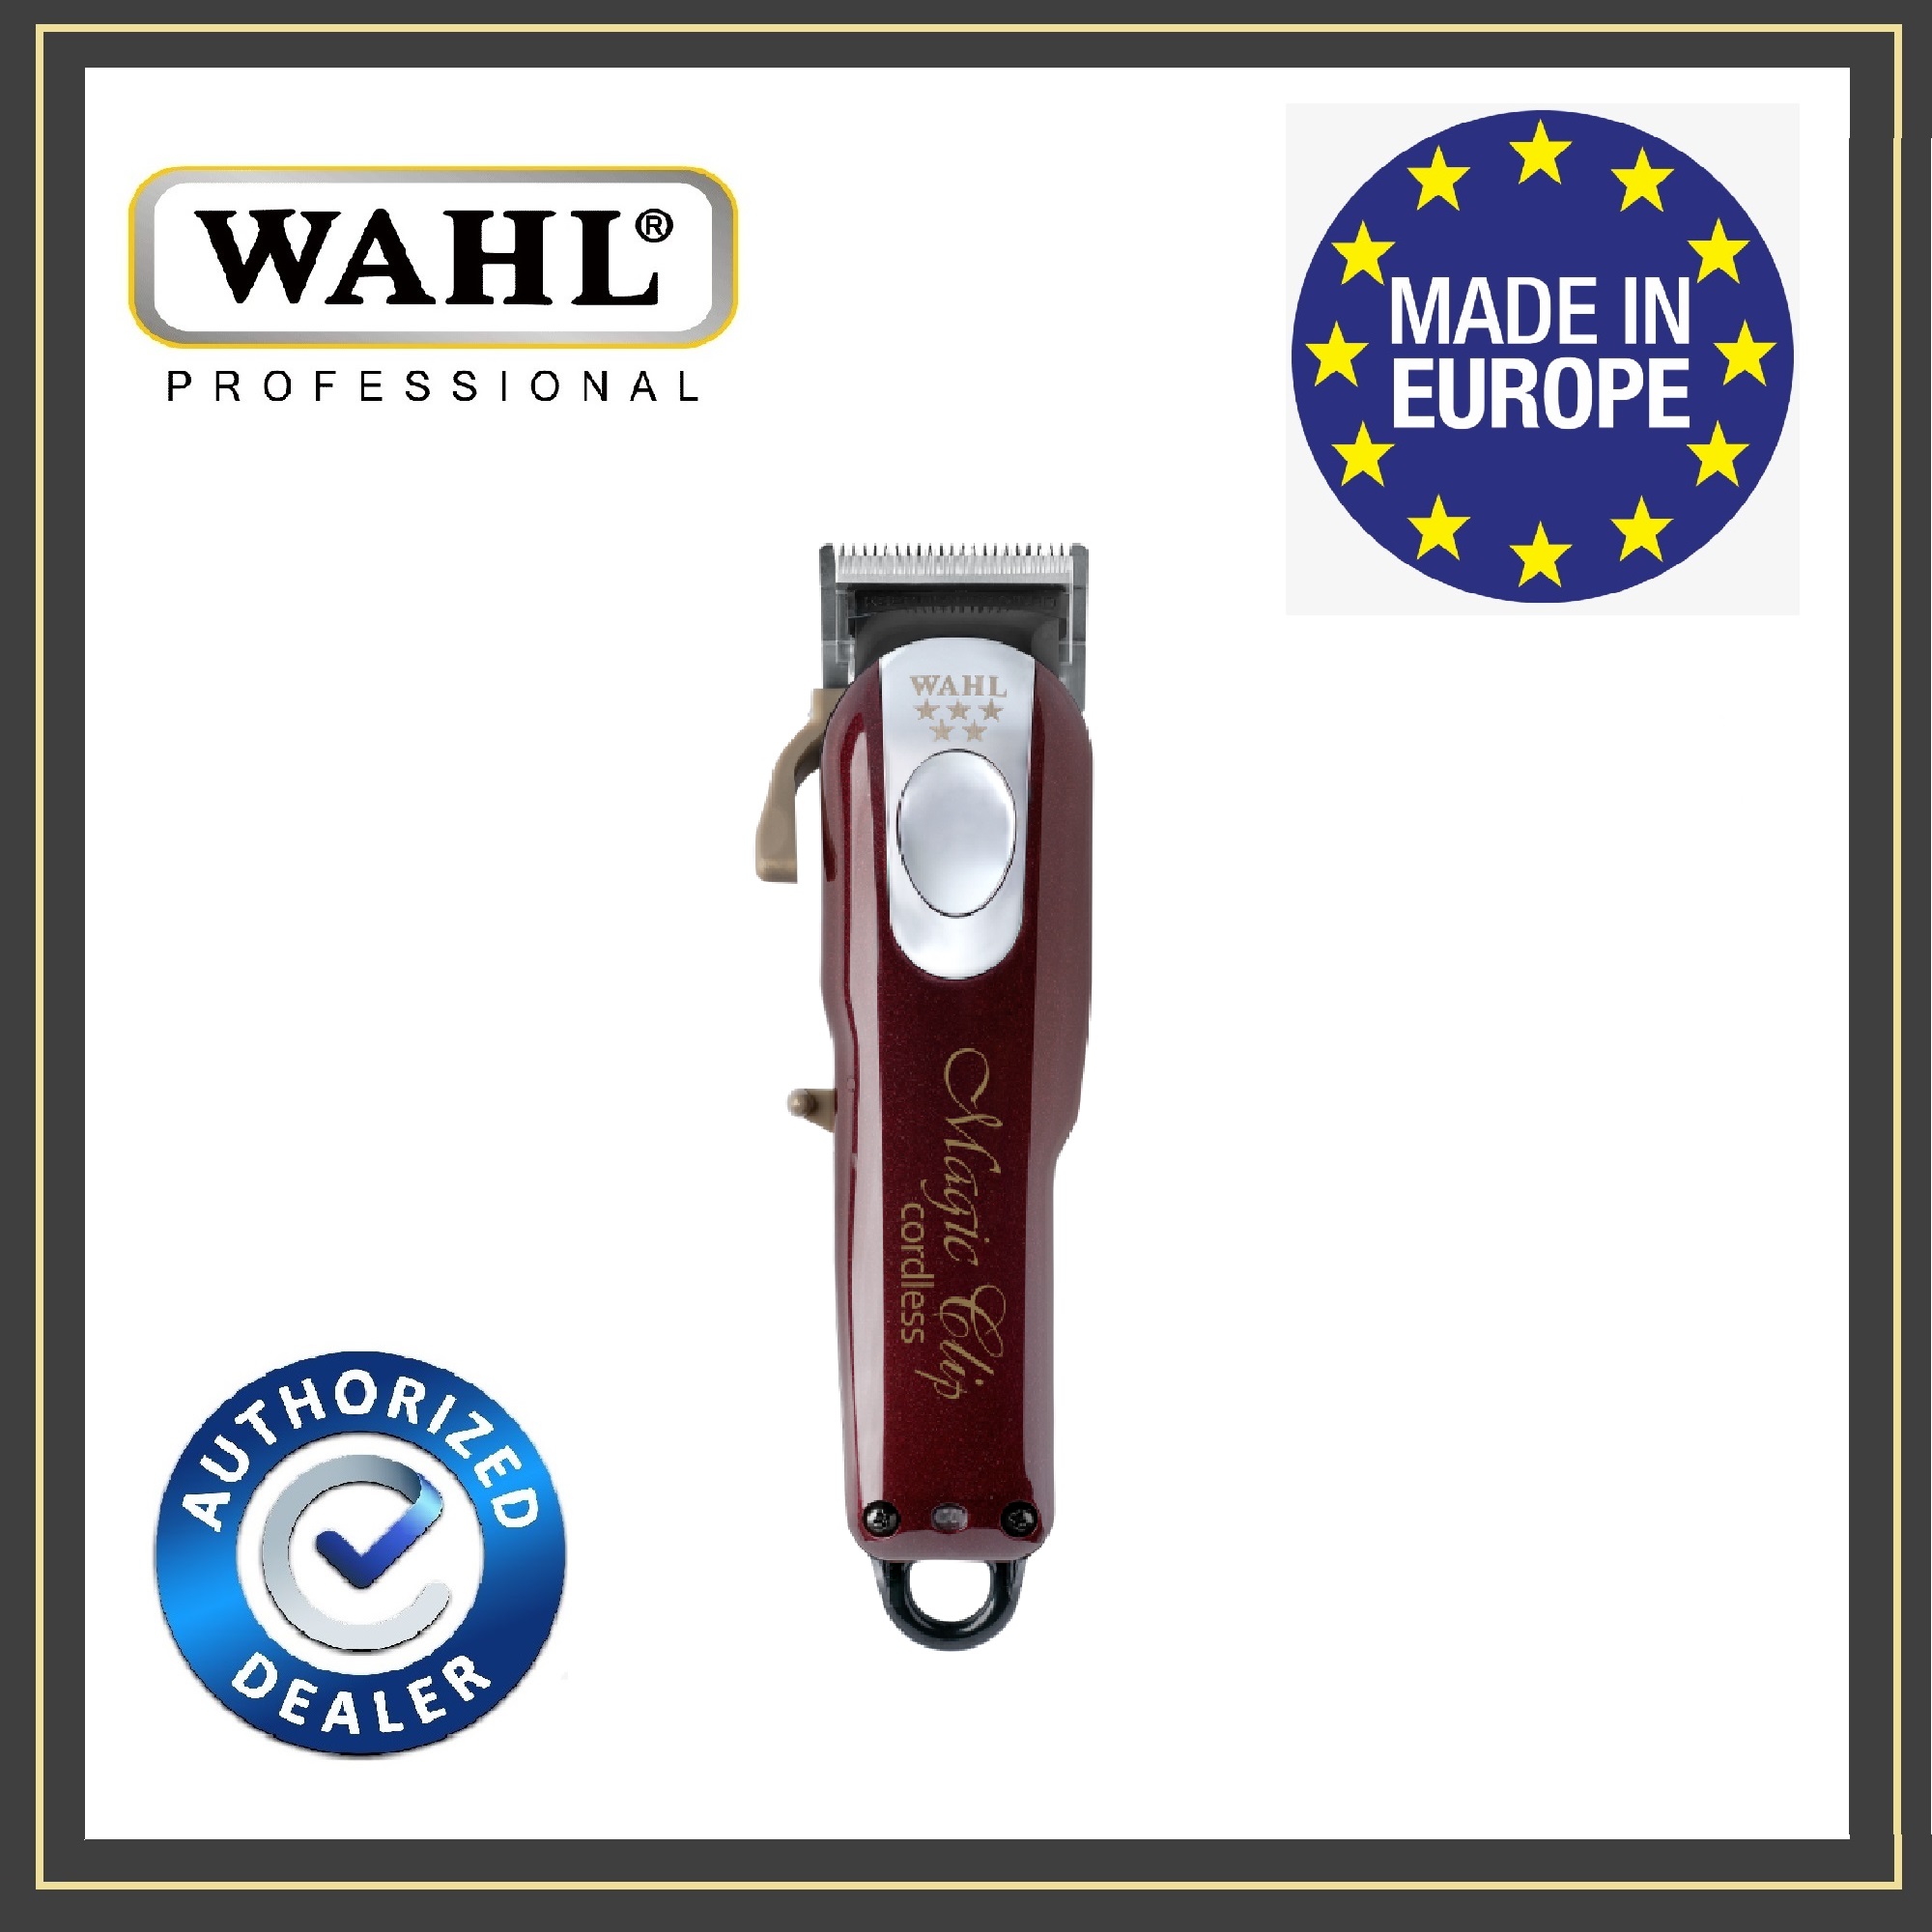 Wahl Professional 5 Star Magic Clip Cord and Cordless Hair Clipper -  Lithium Ion - Shaver, trimmer, grooming tool, hair cut [ 1 YR SG WARRANTY ]  [ MADE IN EUROPE ] | Lazada Singapore